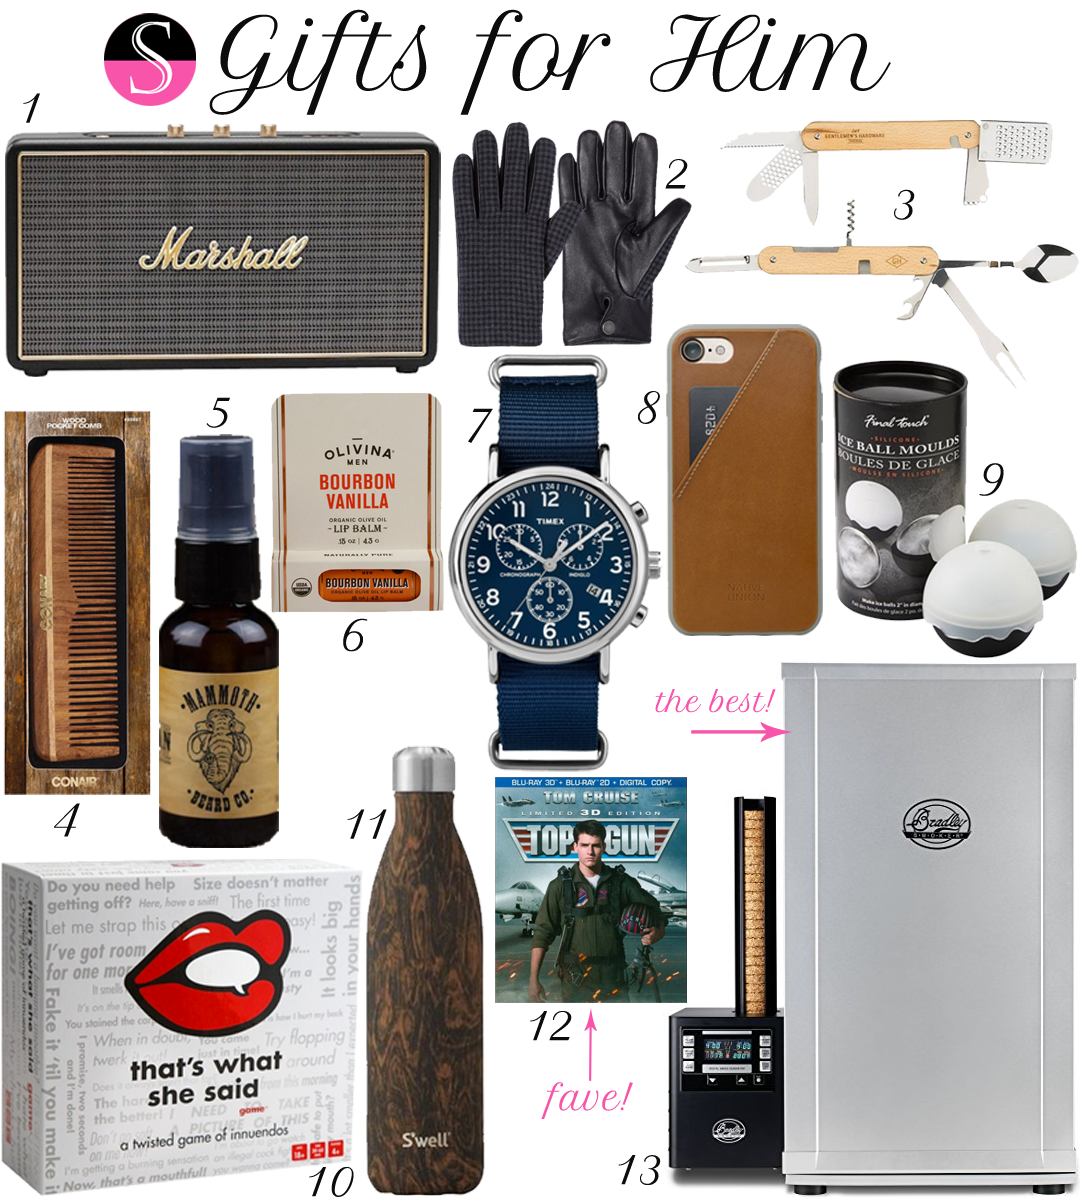 Gifts for Him | Gift Guide | Gifts for Men | Gift Guide | Stocking Stuffers | Gifts for Husband Brother Dad Father Boyfriend | Best Gifts for Men